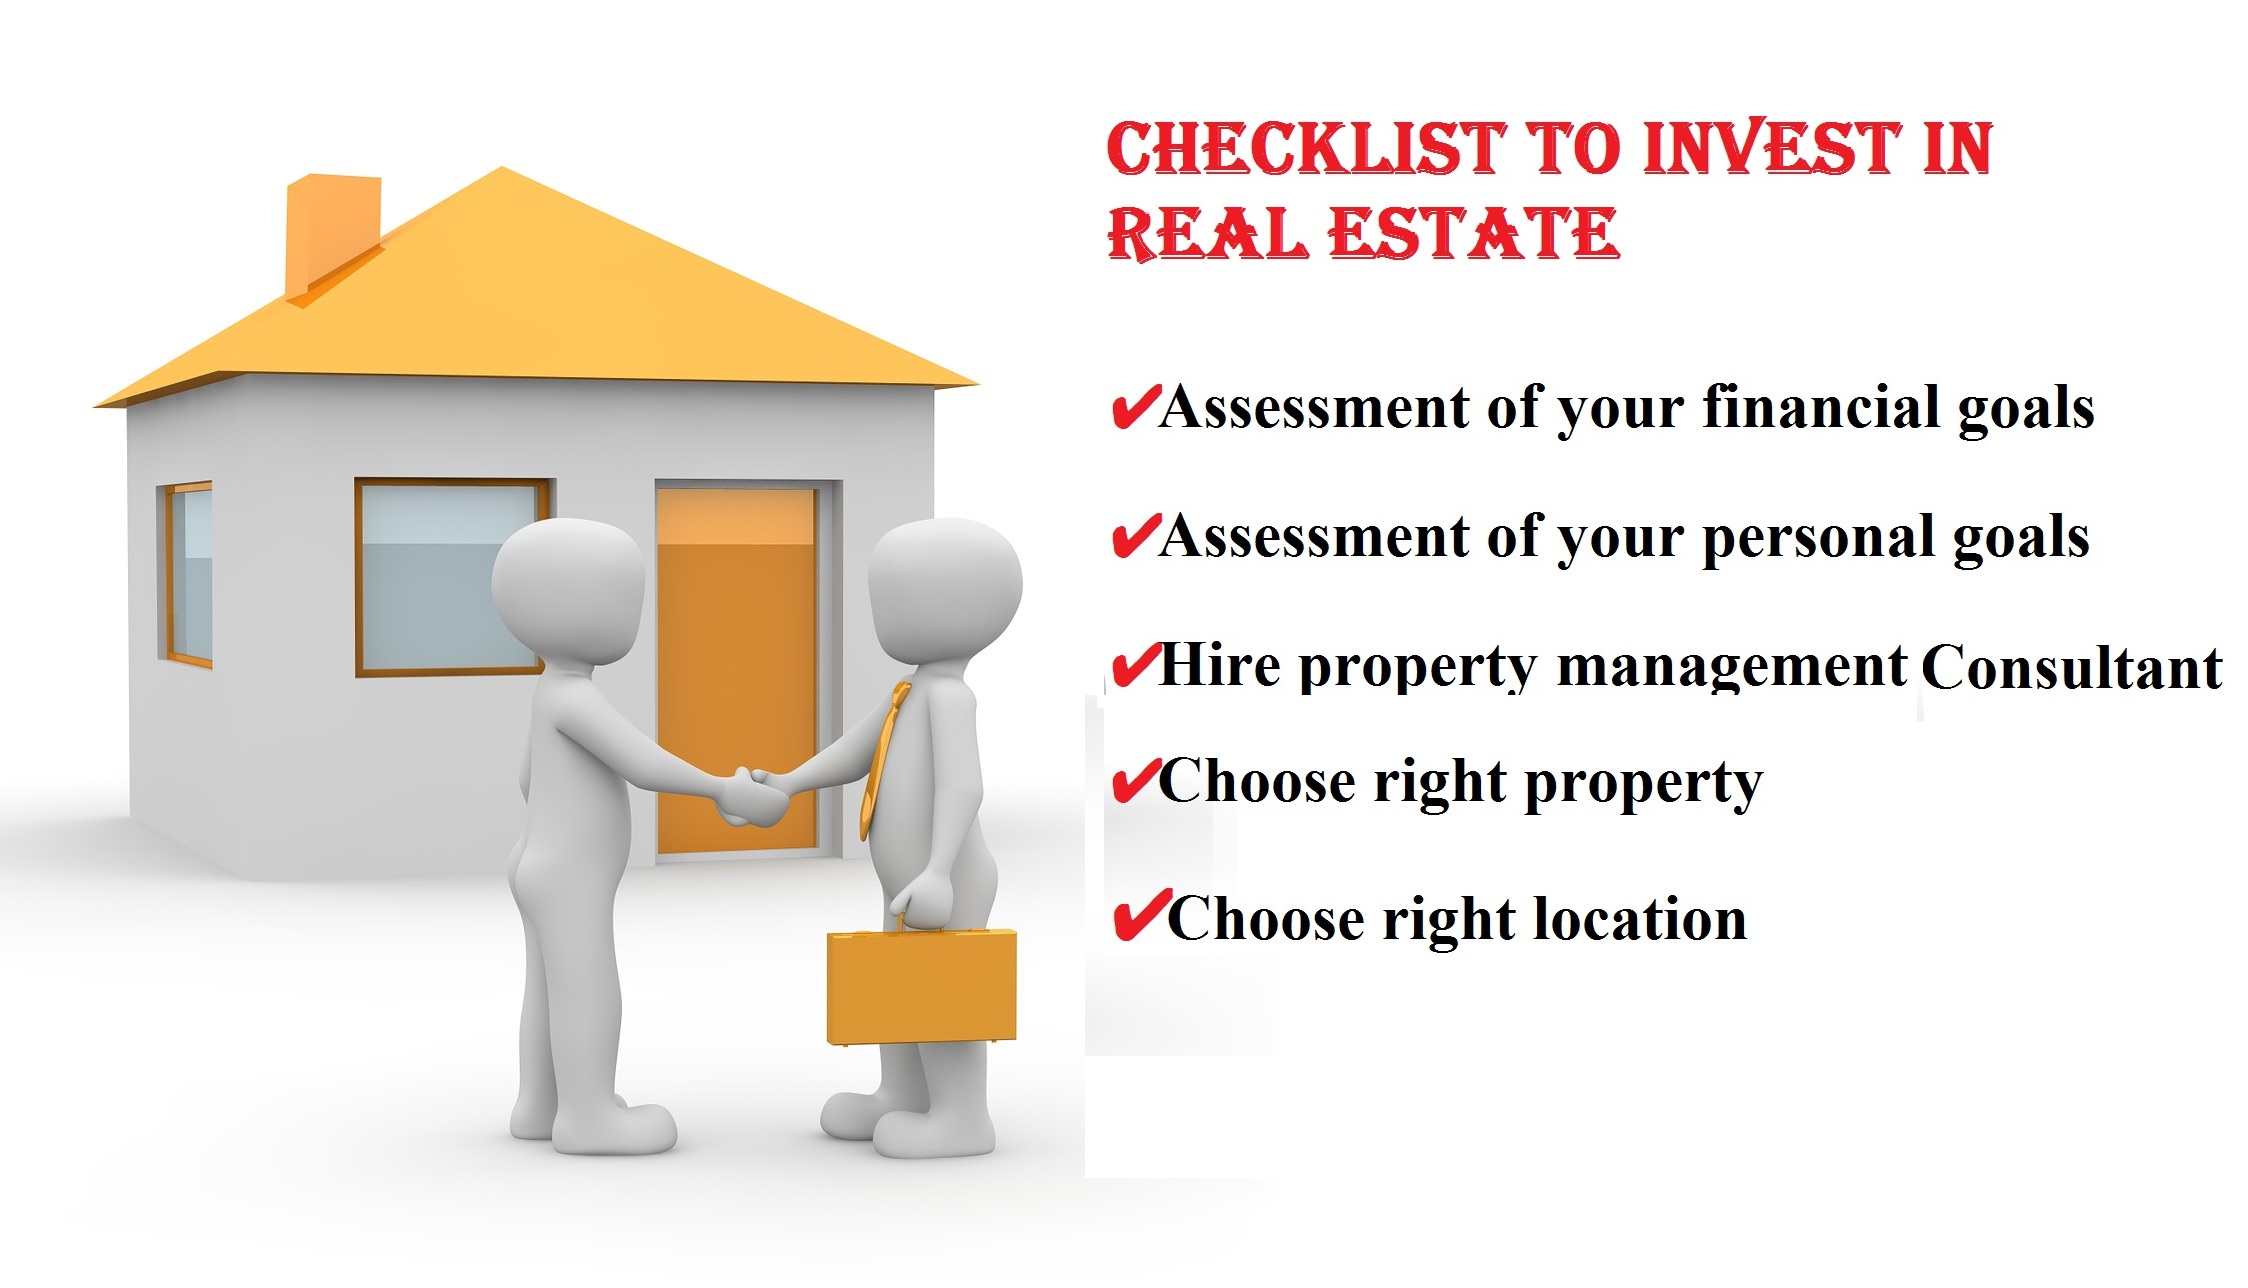 Checklist to Invest Real Estate